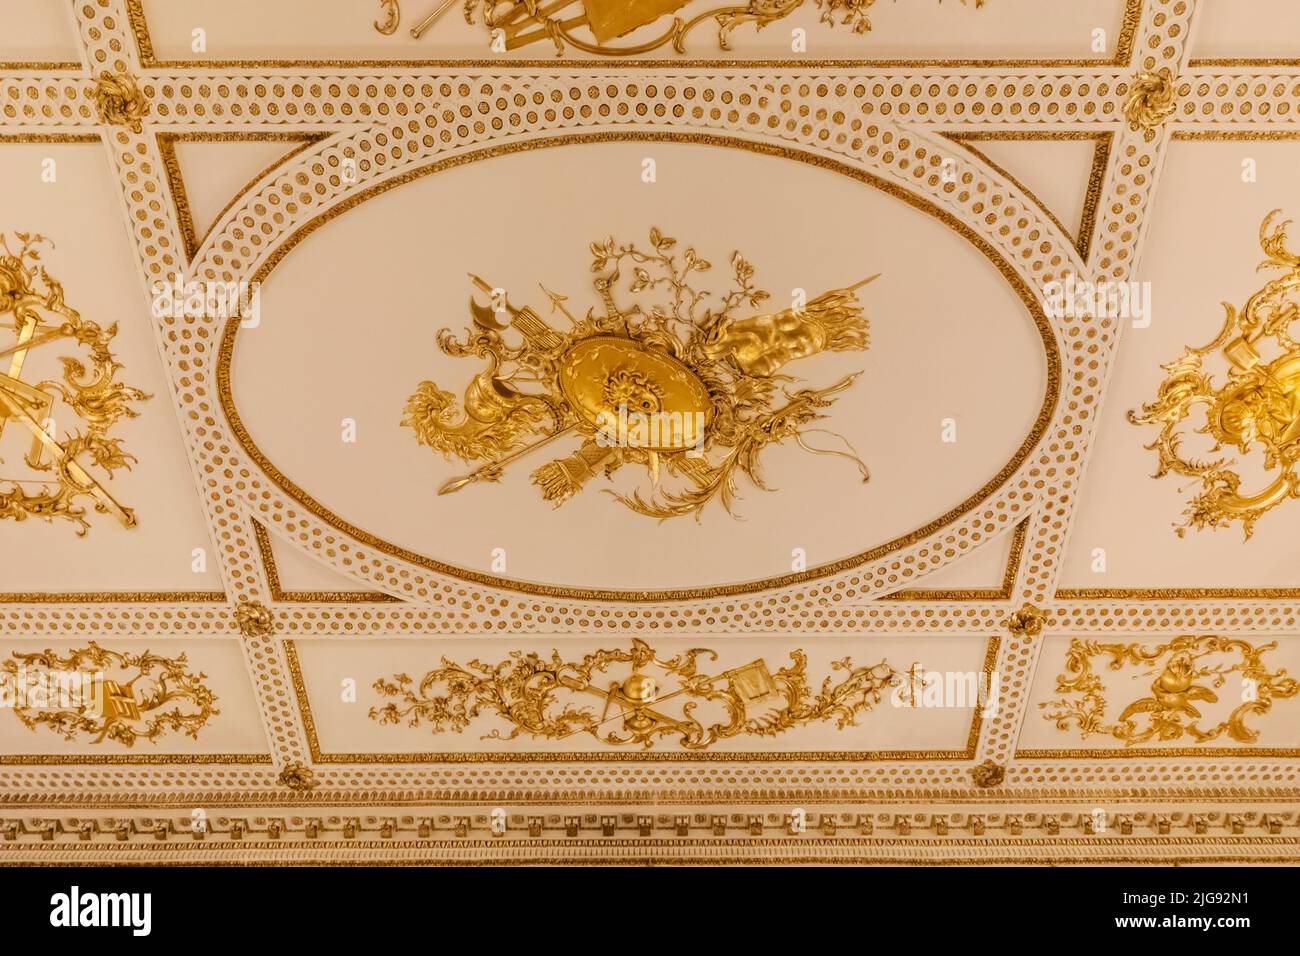 England, London, Knightsbridge, Victoria and Albert Museum, Ceiling Detail of The Music Room from Norfolk House St James's Square London dated 1756 Stock Photo